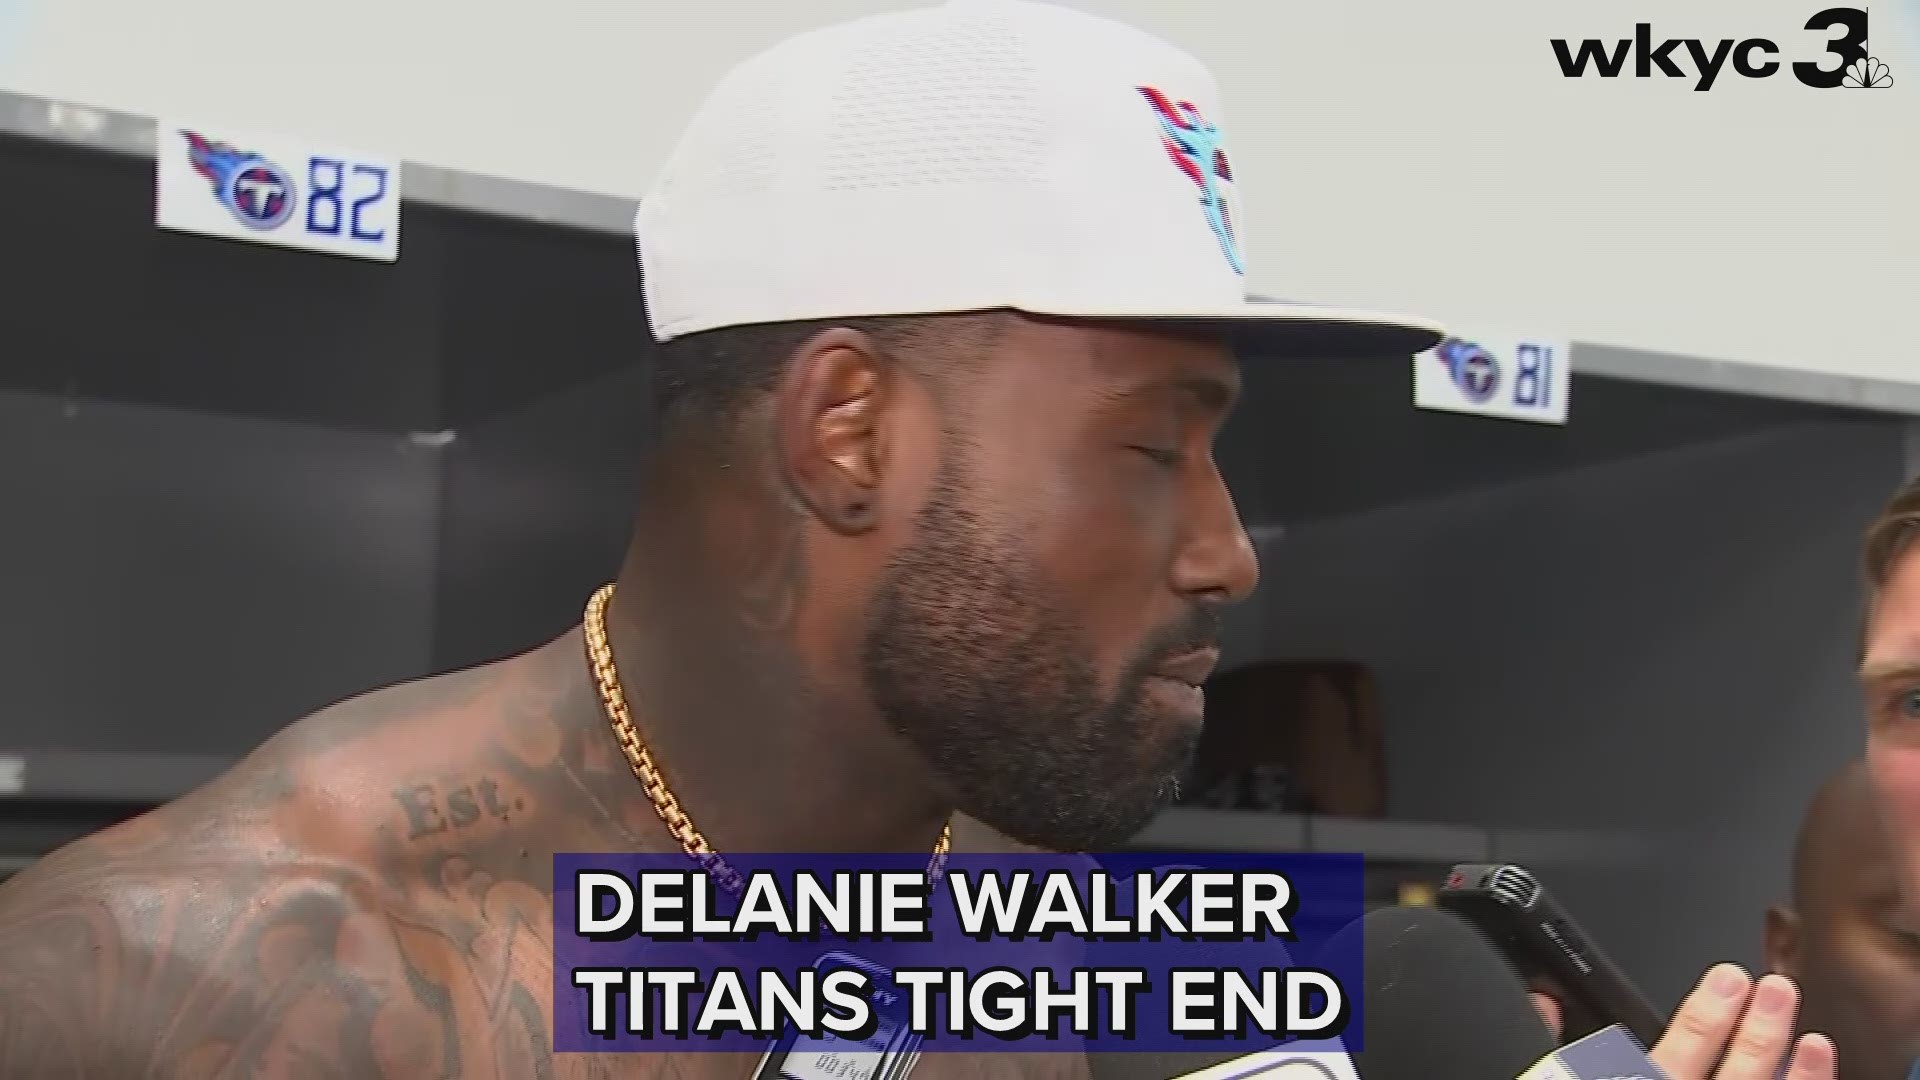 After scoring two touchdowns in Cleveland, Tennessee Titans tight end Delanie Walker had some parting shots for the Browns.